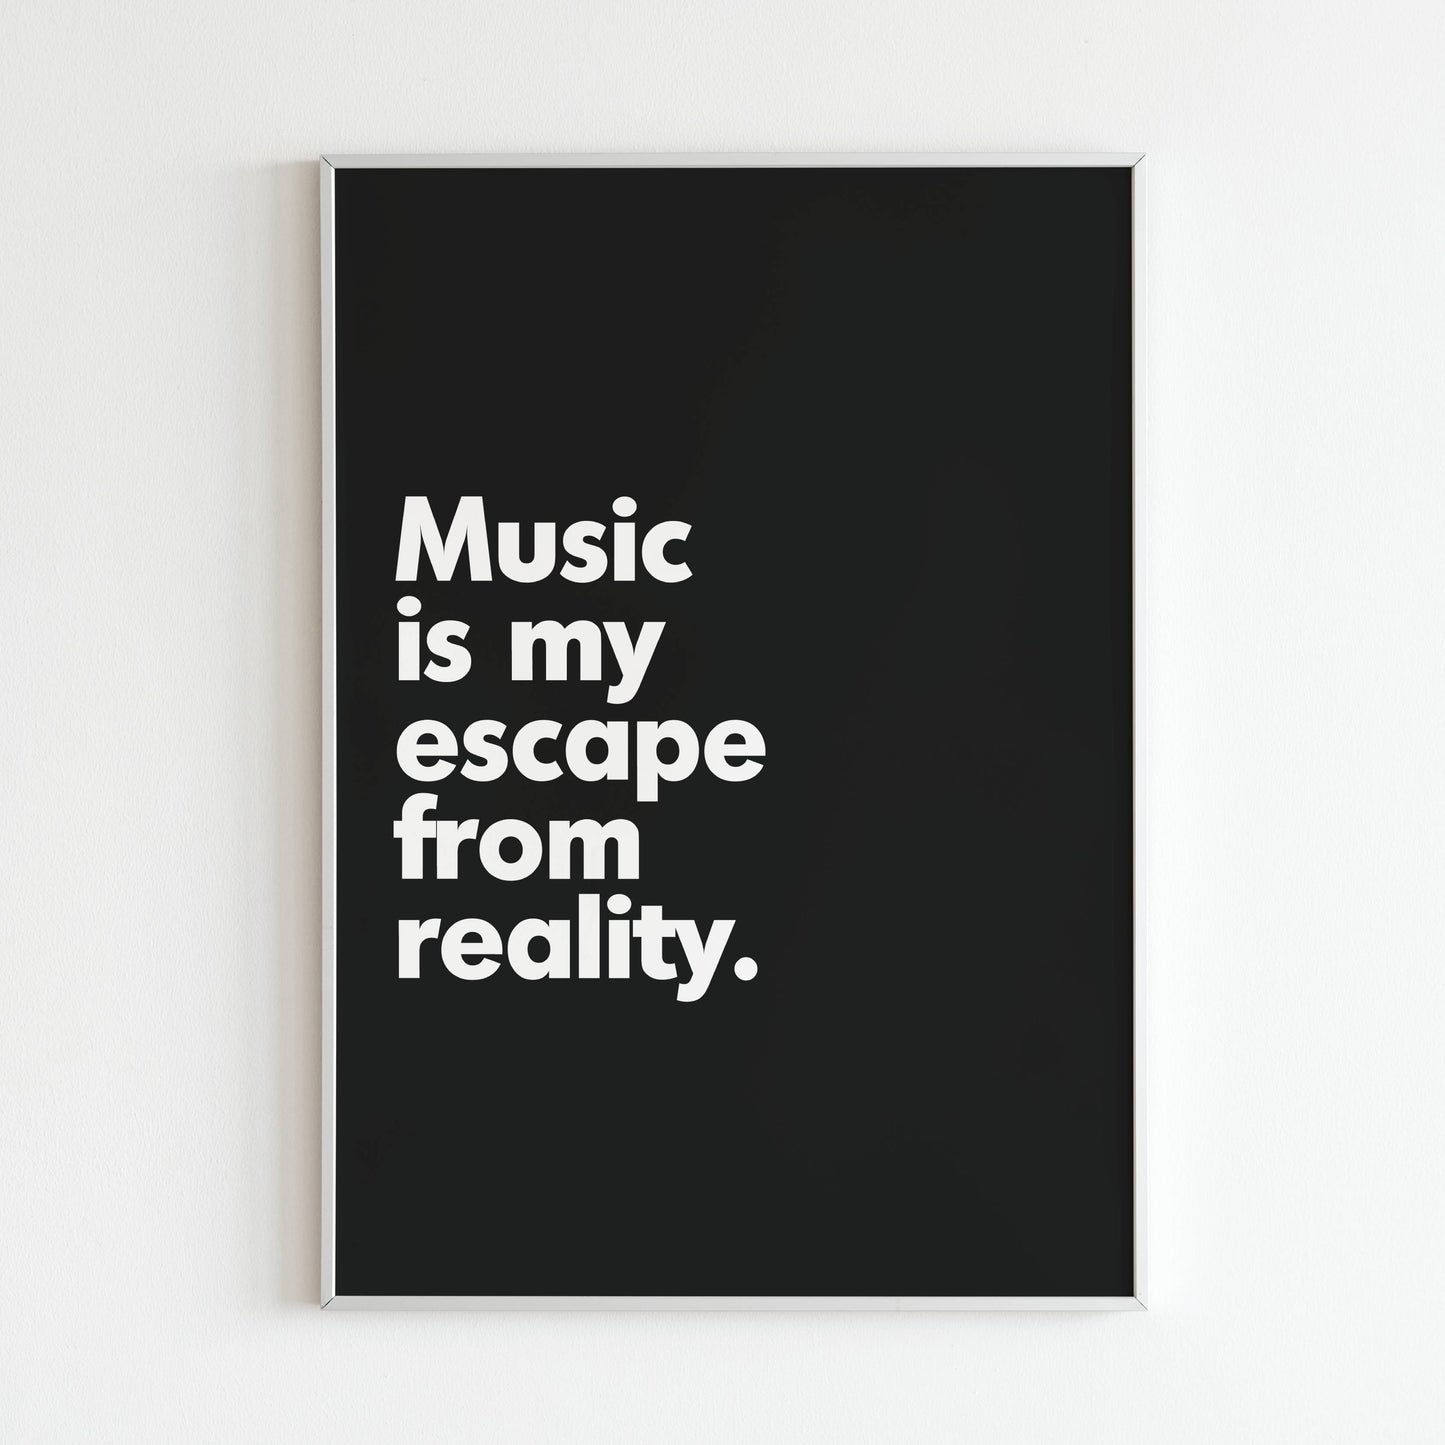 Printable music quote poster - Uplifting typography art for music lovers.